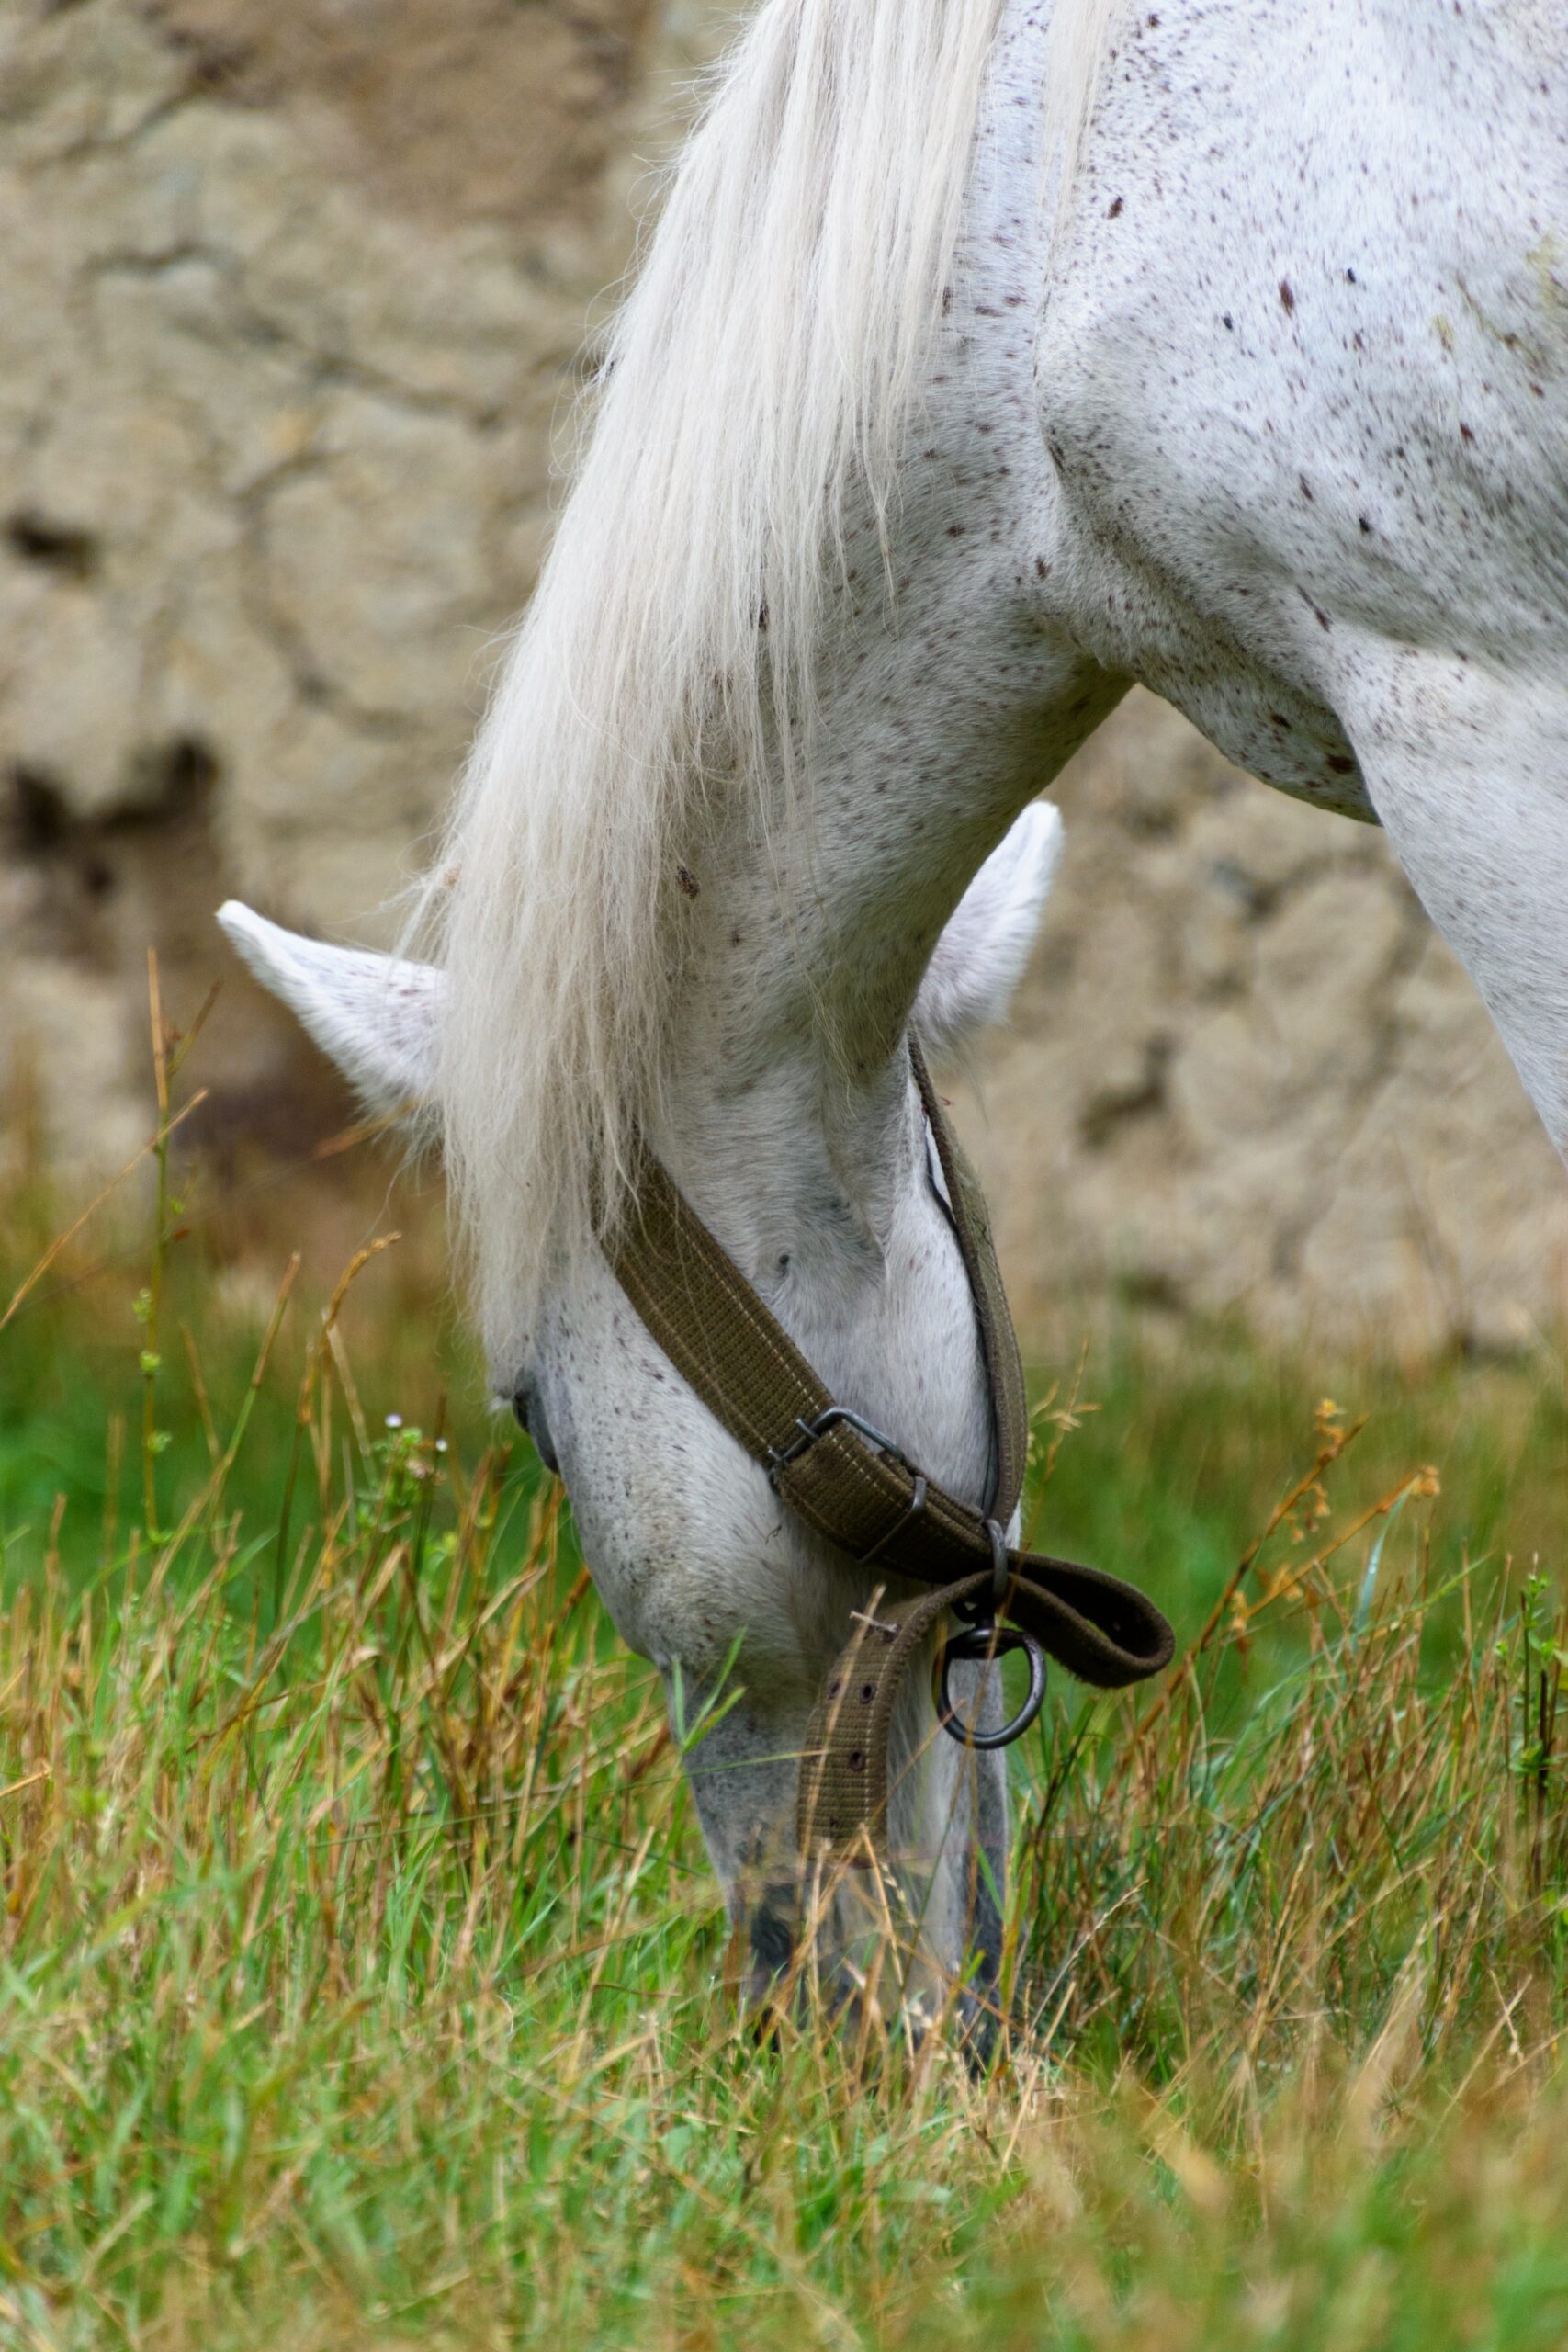 What is the number one cause of Colic in Horses?